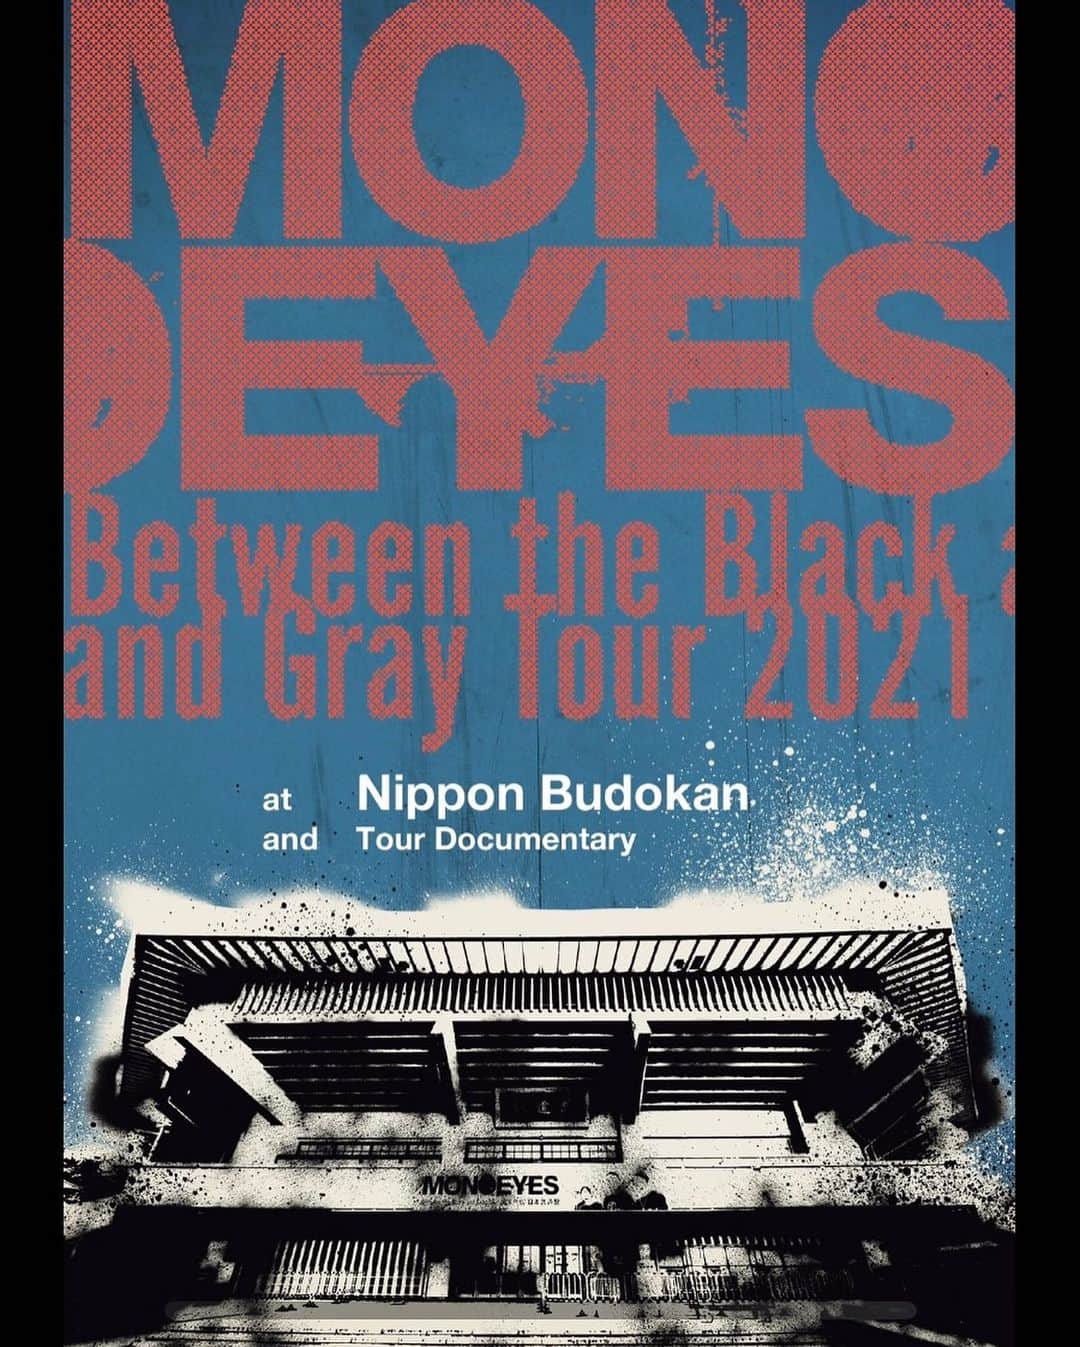 MONOEYESさんのインスタグラム写真 - (MONOEYESInstagram)「昨年開催したライブツアー「Between the Black and Gray Tour 2021」より、11月2日 (火) 日本武道館公演を収めたライブDVD＆Blu-rayのリリース決定！ ライブ映像に加えて90分におよぶツアードキュメンタリー映像も収録！  📀MONOEYES 3rd DVD＆Blu-ray 「Between the Black and Gray Tour 2021 at Nippon Budokan and Tour Documentary」  💥2022年5月11日 (水) 発売💥  【DVD】(2枚組) UPBH-20287/8 ￥2,970 (税込) 【Blu-ray】UPXH-20112 ￥3,960 (税込)  ＜収録内容＞ 🔸Between the Black and Gray Tour 2021 at Nippon Budokan  Fall Out Bygone Run Run Free Throw Interstate 46 Cold Reaction Like We’ve Never Lost Roxette Get Up Iridescent Light Nothing グラニート When I Was A King Somewhere On Fullerton  明日公園で Borders & Walls Two Little Fishes Outer Rim My Instant Song リザードマン  - Encore - 3, 2, 1 Go 彼は誰の夢  - Double Encore - Remember Me  🔸Tour Documentary 90分におよぶツアードキュメンタリー映像を収録  Apple Music、Spotify、LINE MUSIC 日本武道館セットリストプレイリスト 🔻https://lnk.to/BtBaGT2021」3月25日 18時01分 - monoeyes_official